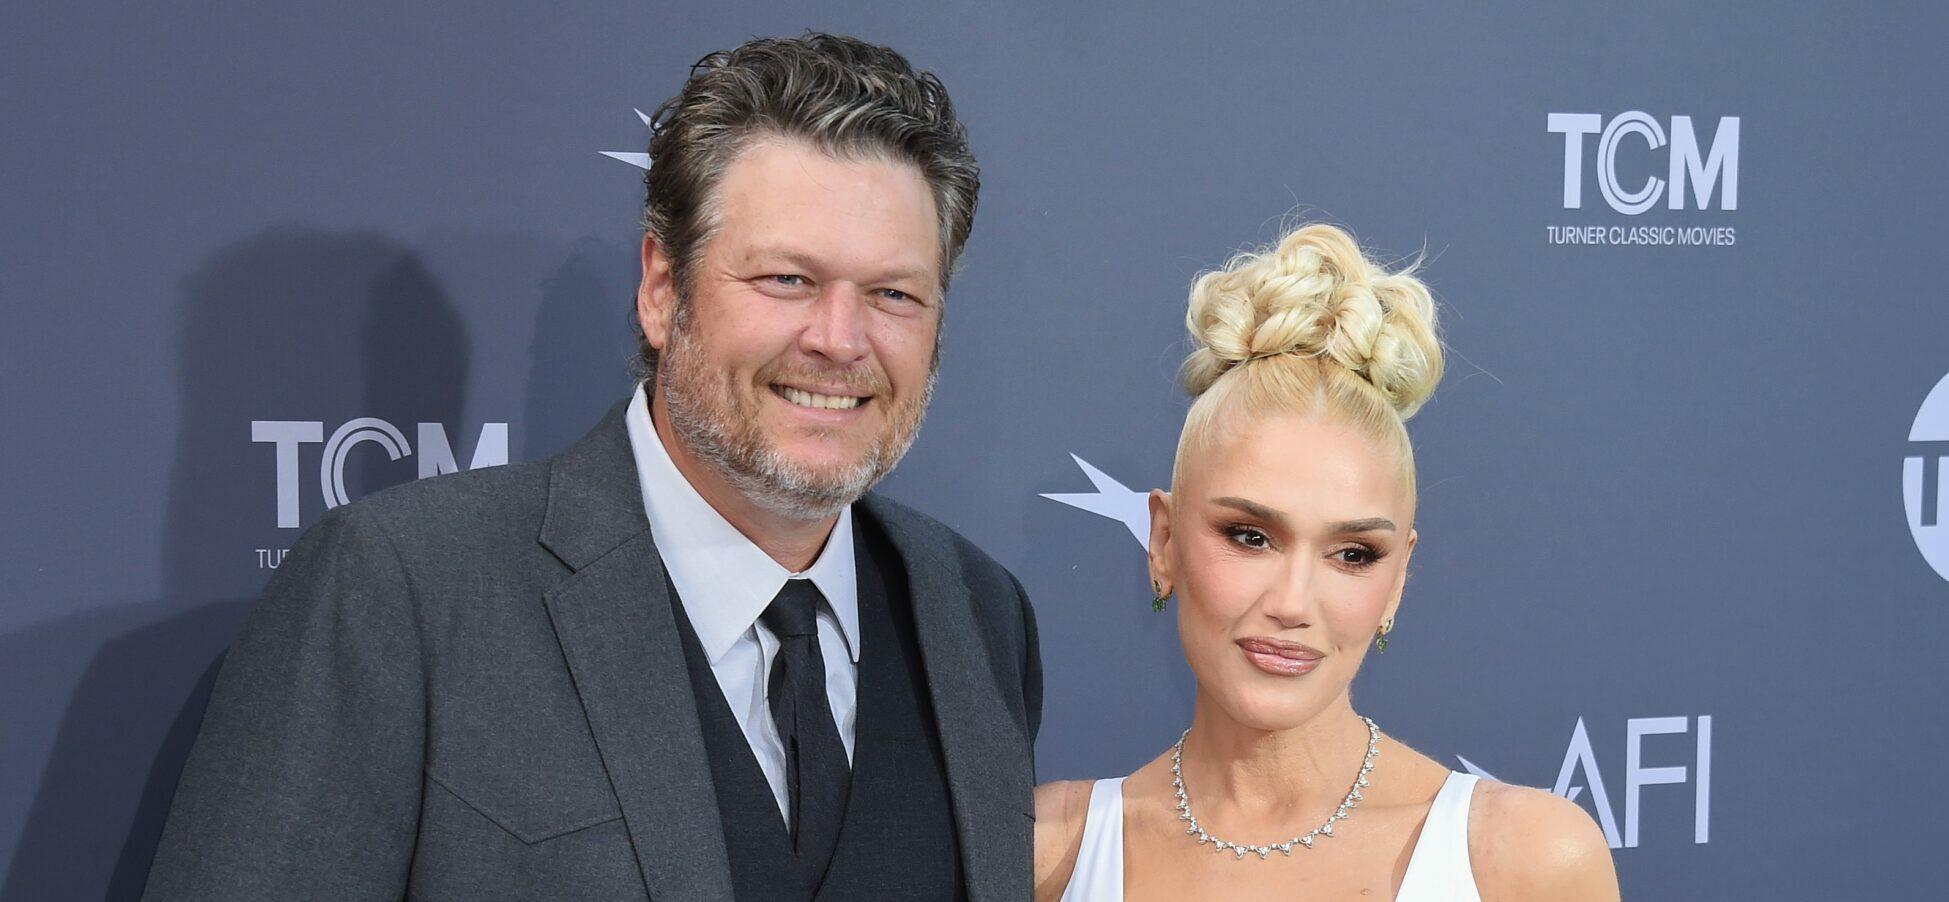 Gwen Stefani Steps Out Solo In THESE For First Time Without Blake Shelton!